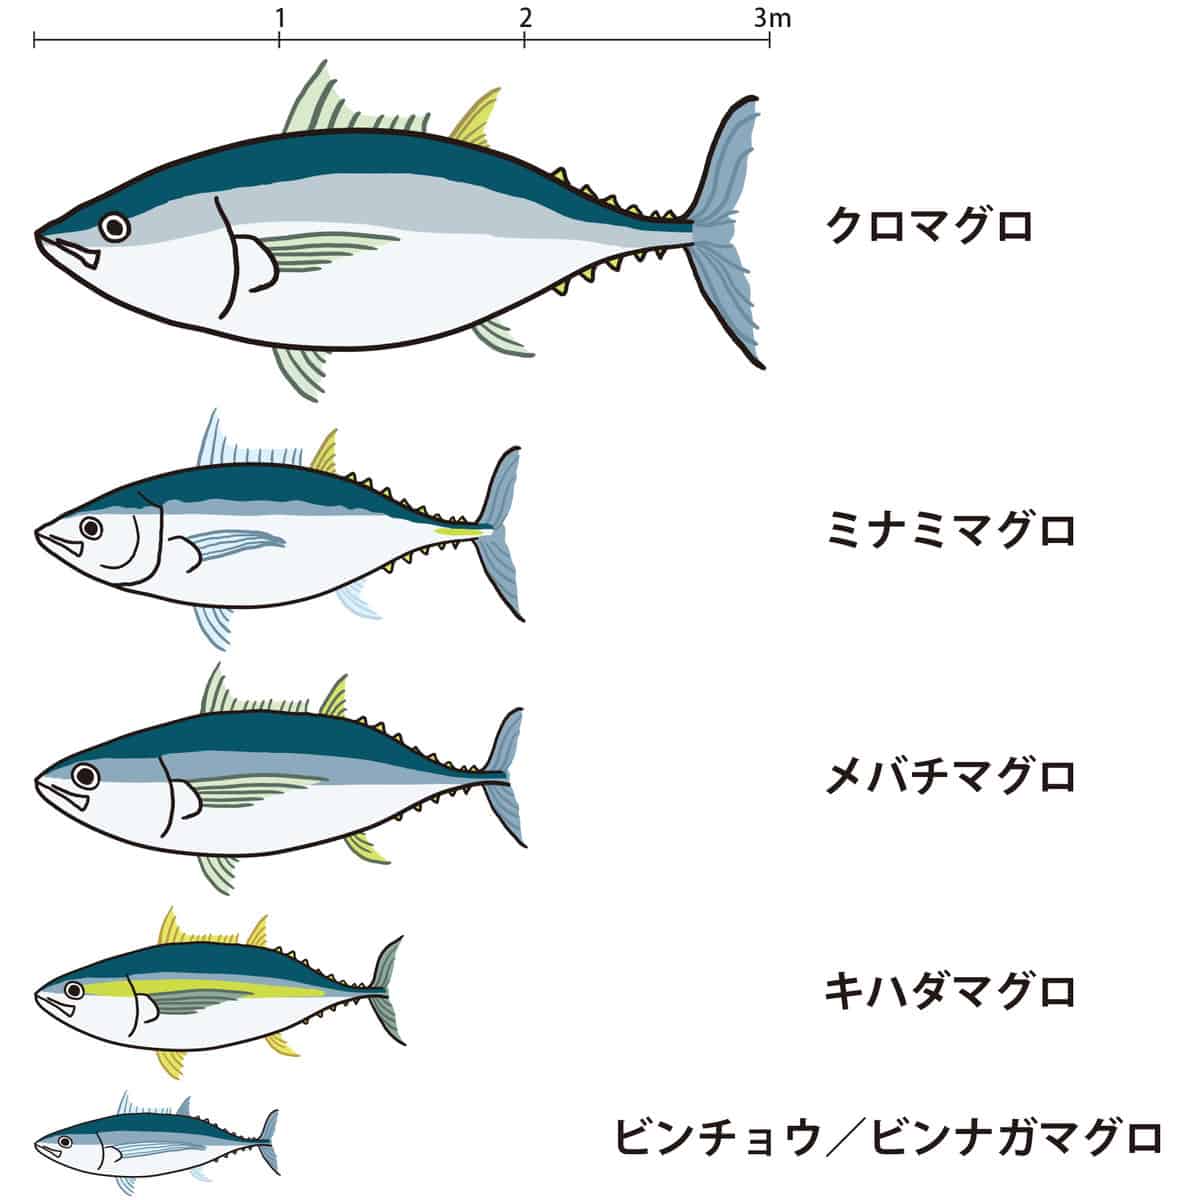 Types of tuna in Japan